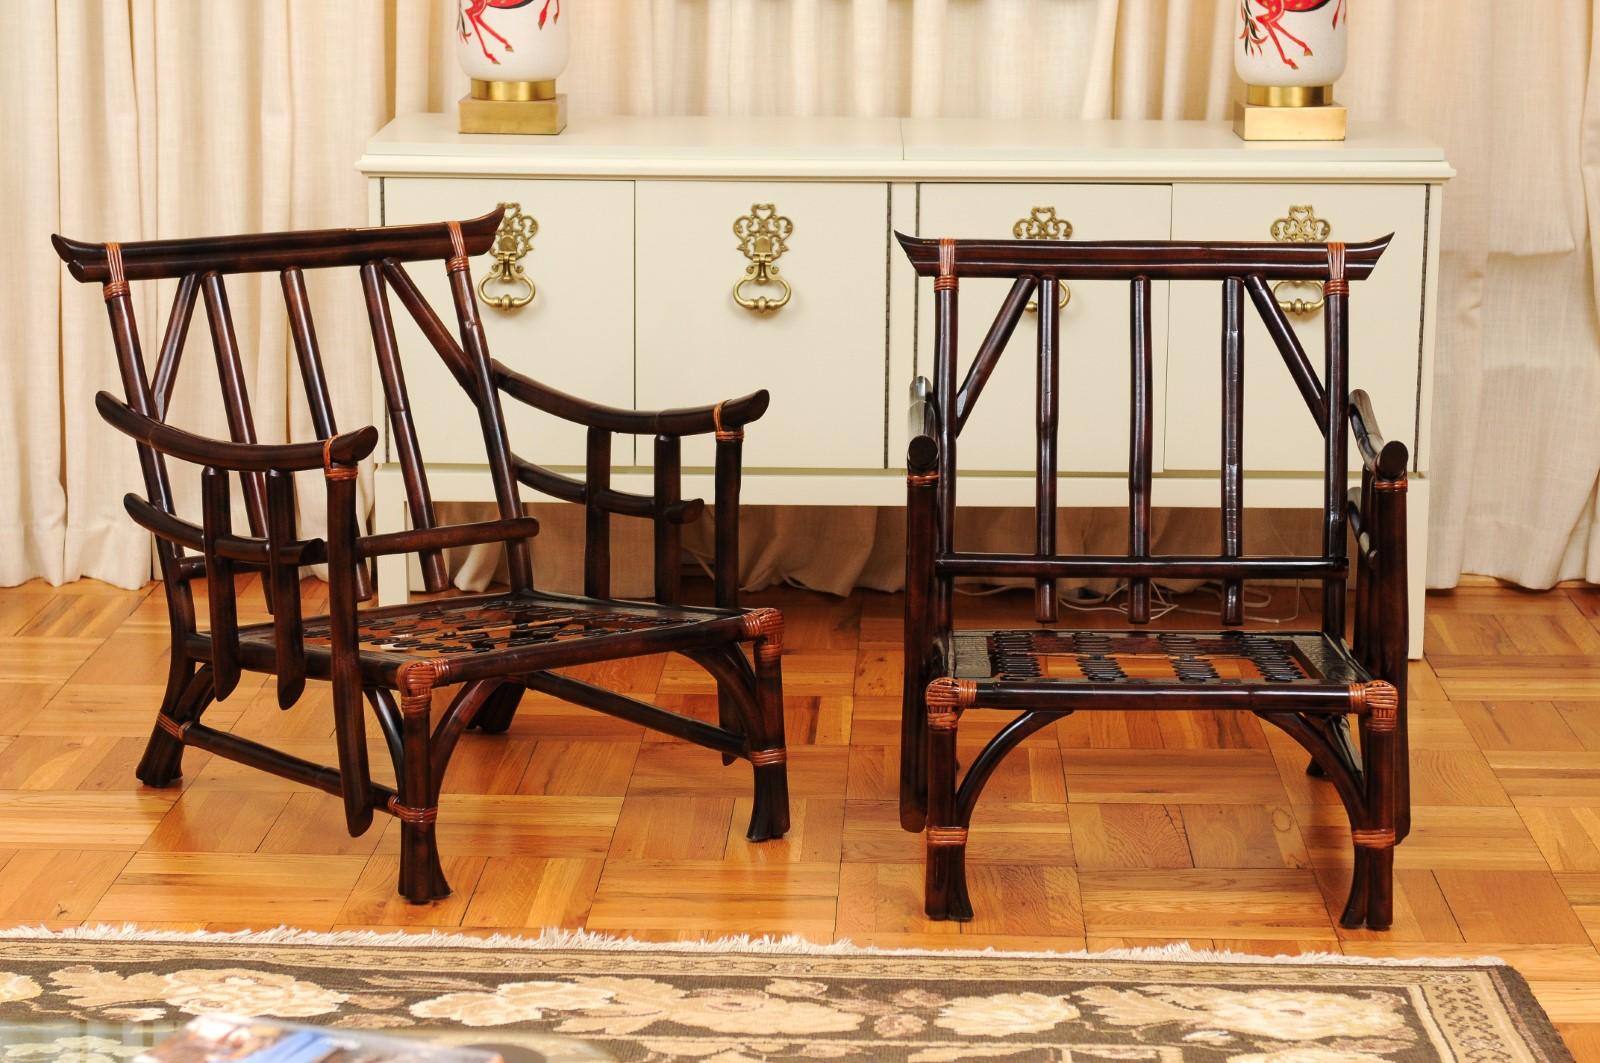 These magnificent lounge chair frames are shipped as professionally photographed and described in the listing narrative: Meticulously professionally restored and ready for upholstery. Expert custom upholstery service is available.

An